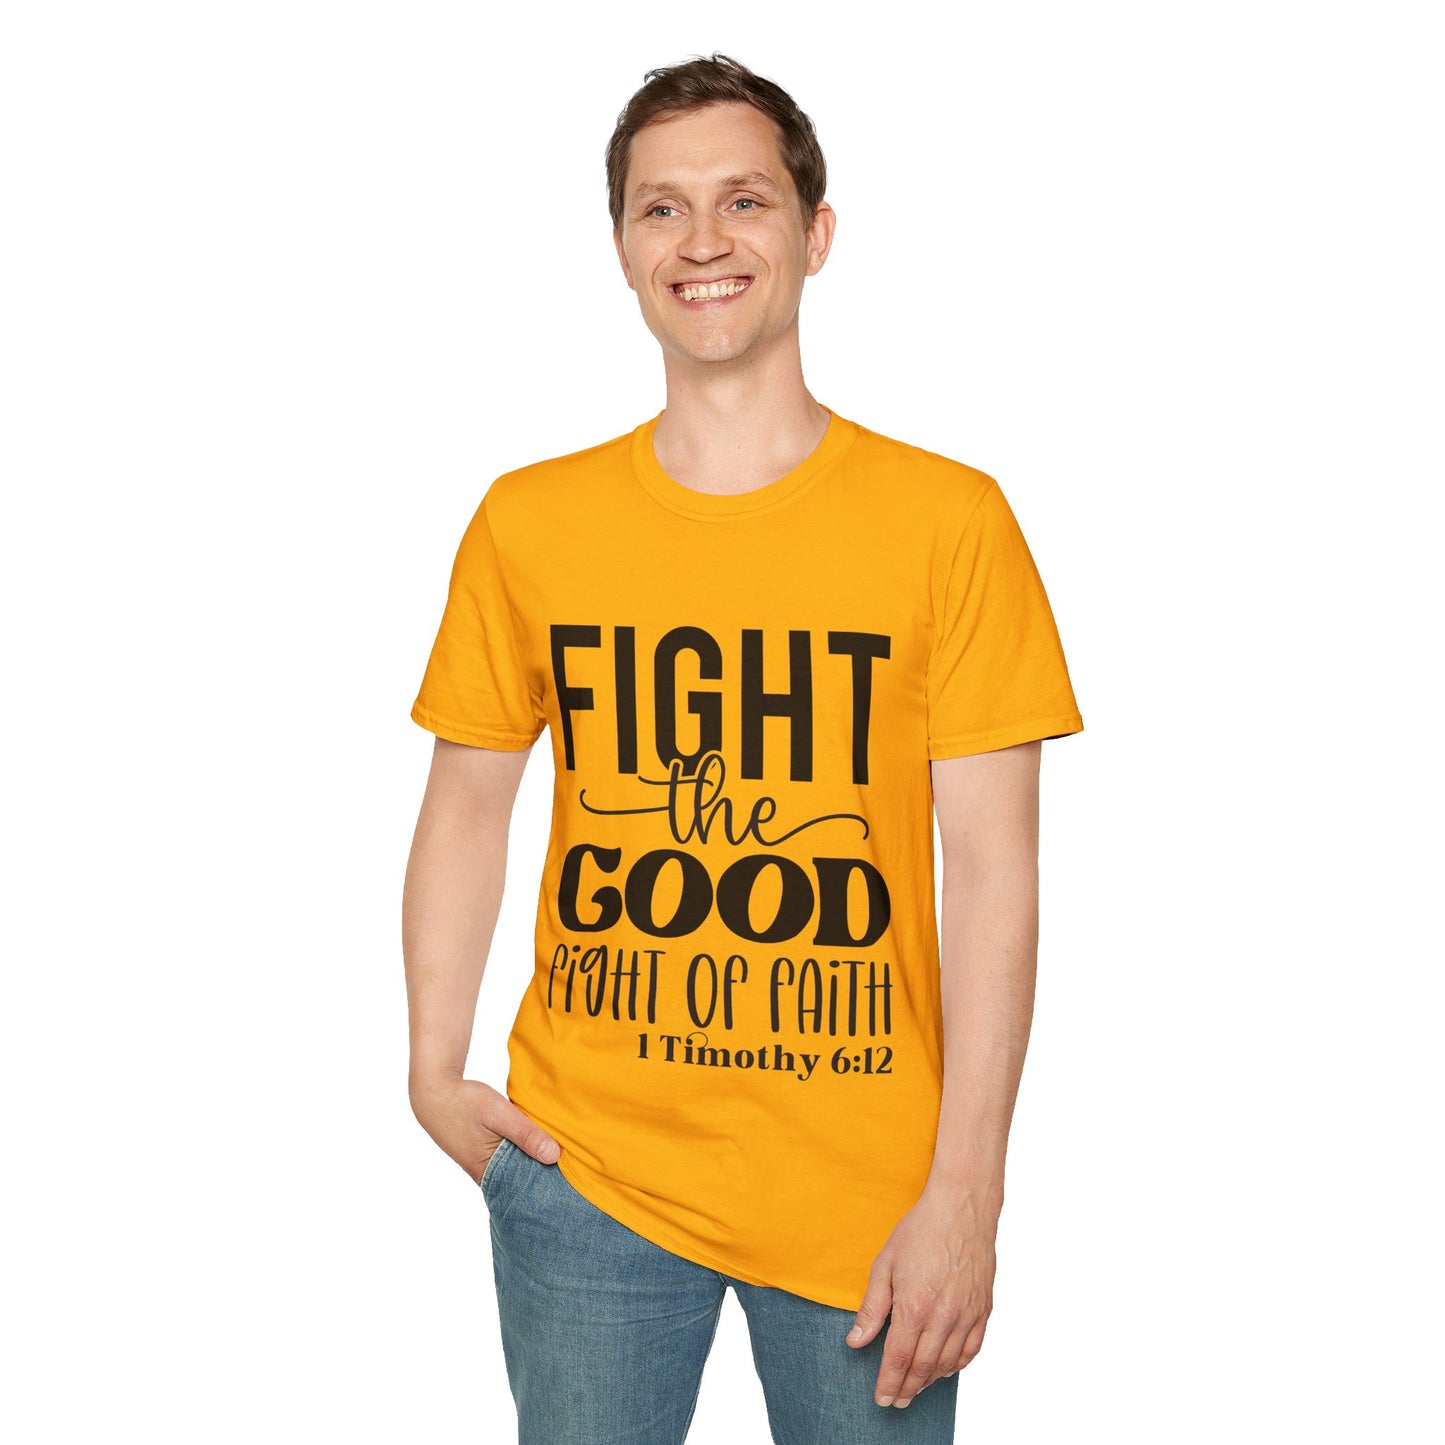 Fight the Good Fight of Faith 1 Timothy 6:12 Triple Viking T-Shirt